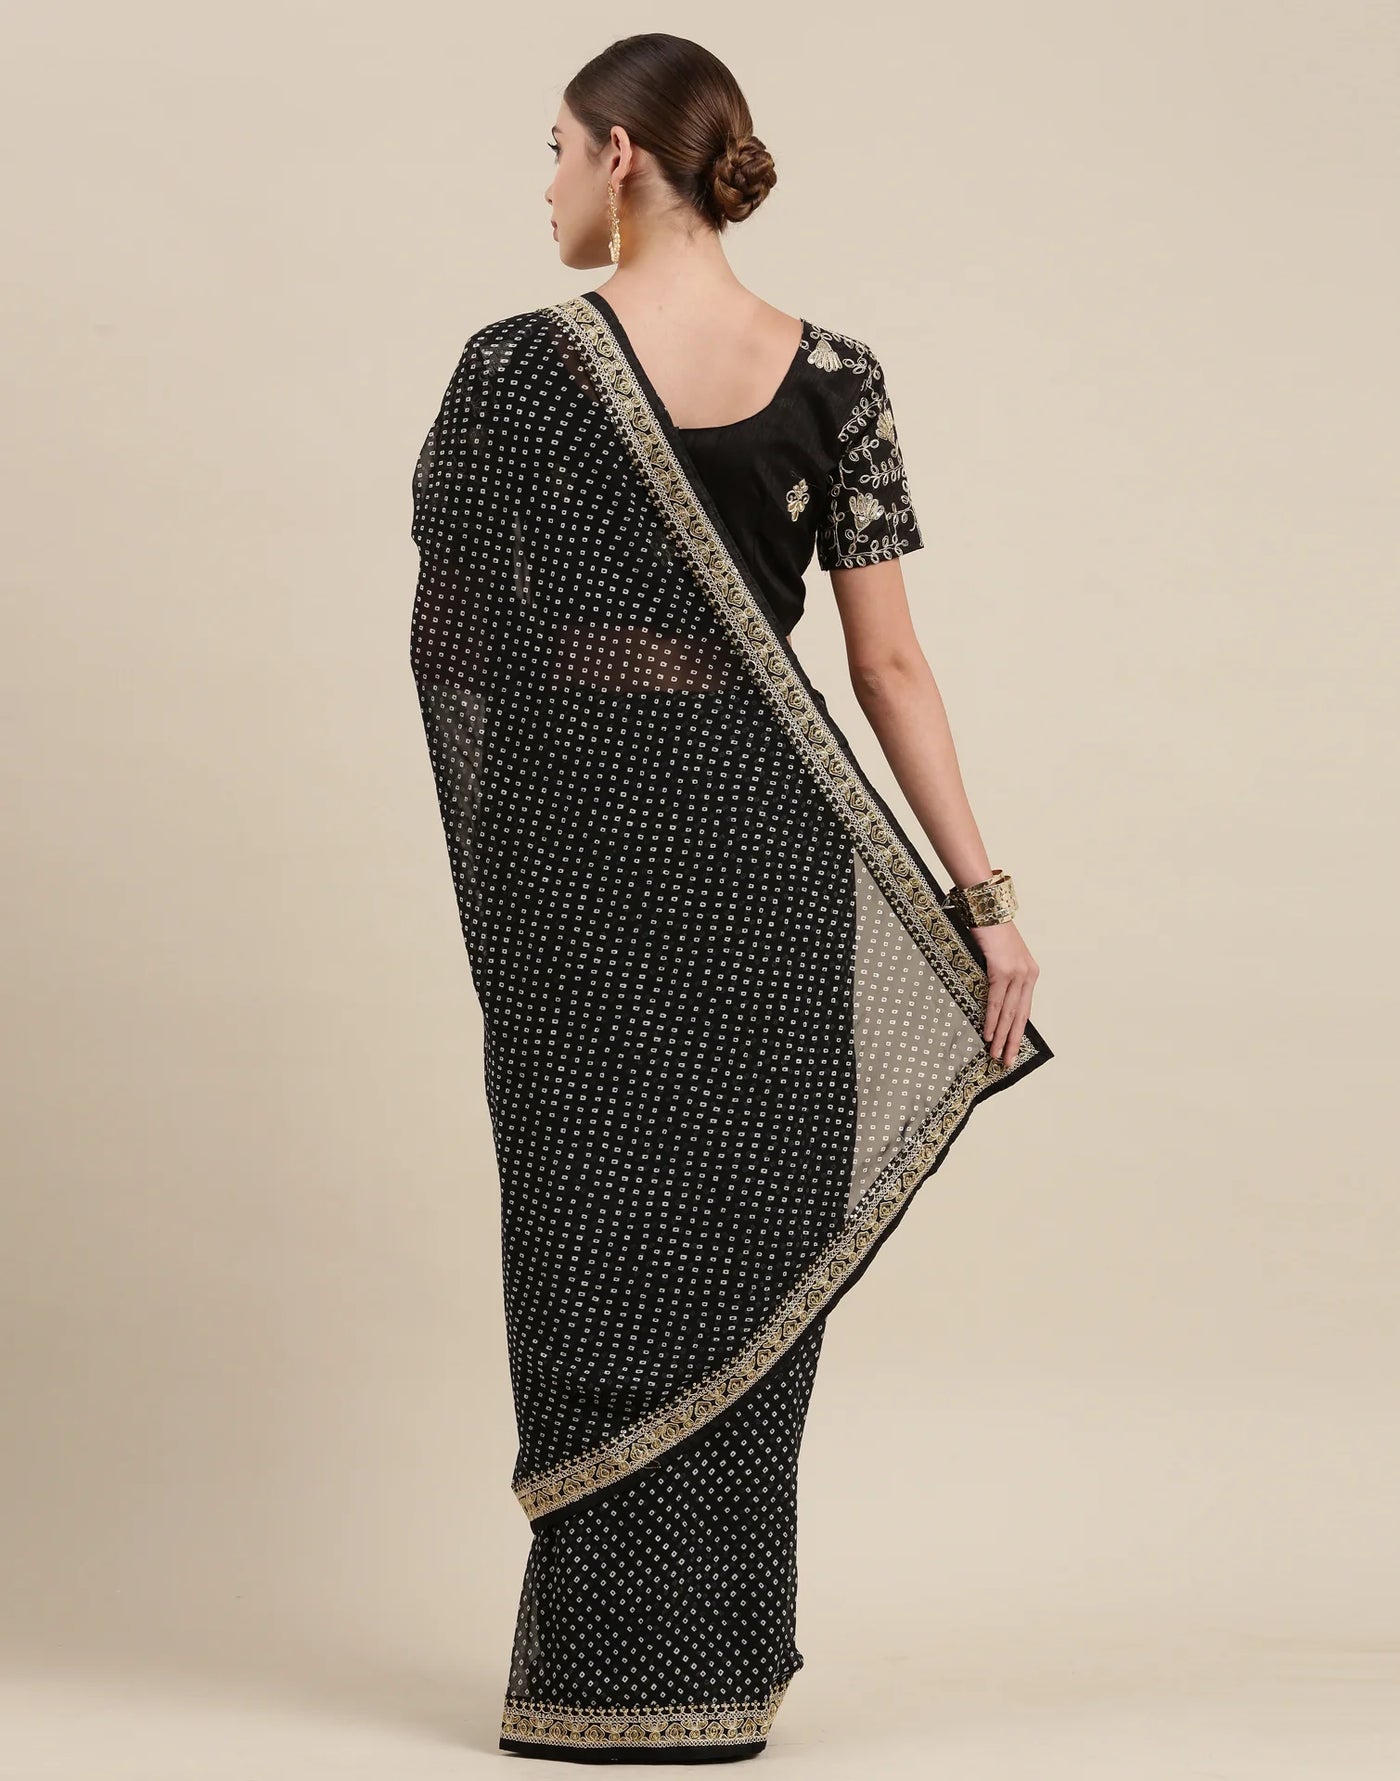 BLACK Bandhani Saree With Embroidery Work Blouse